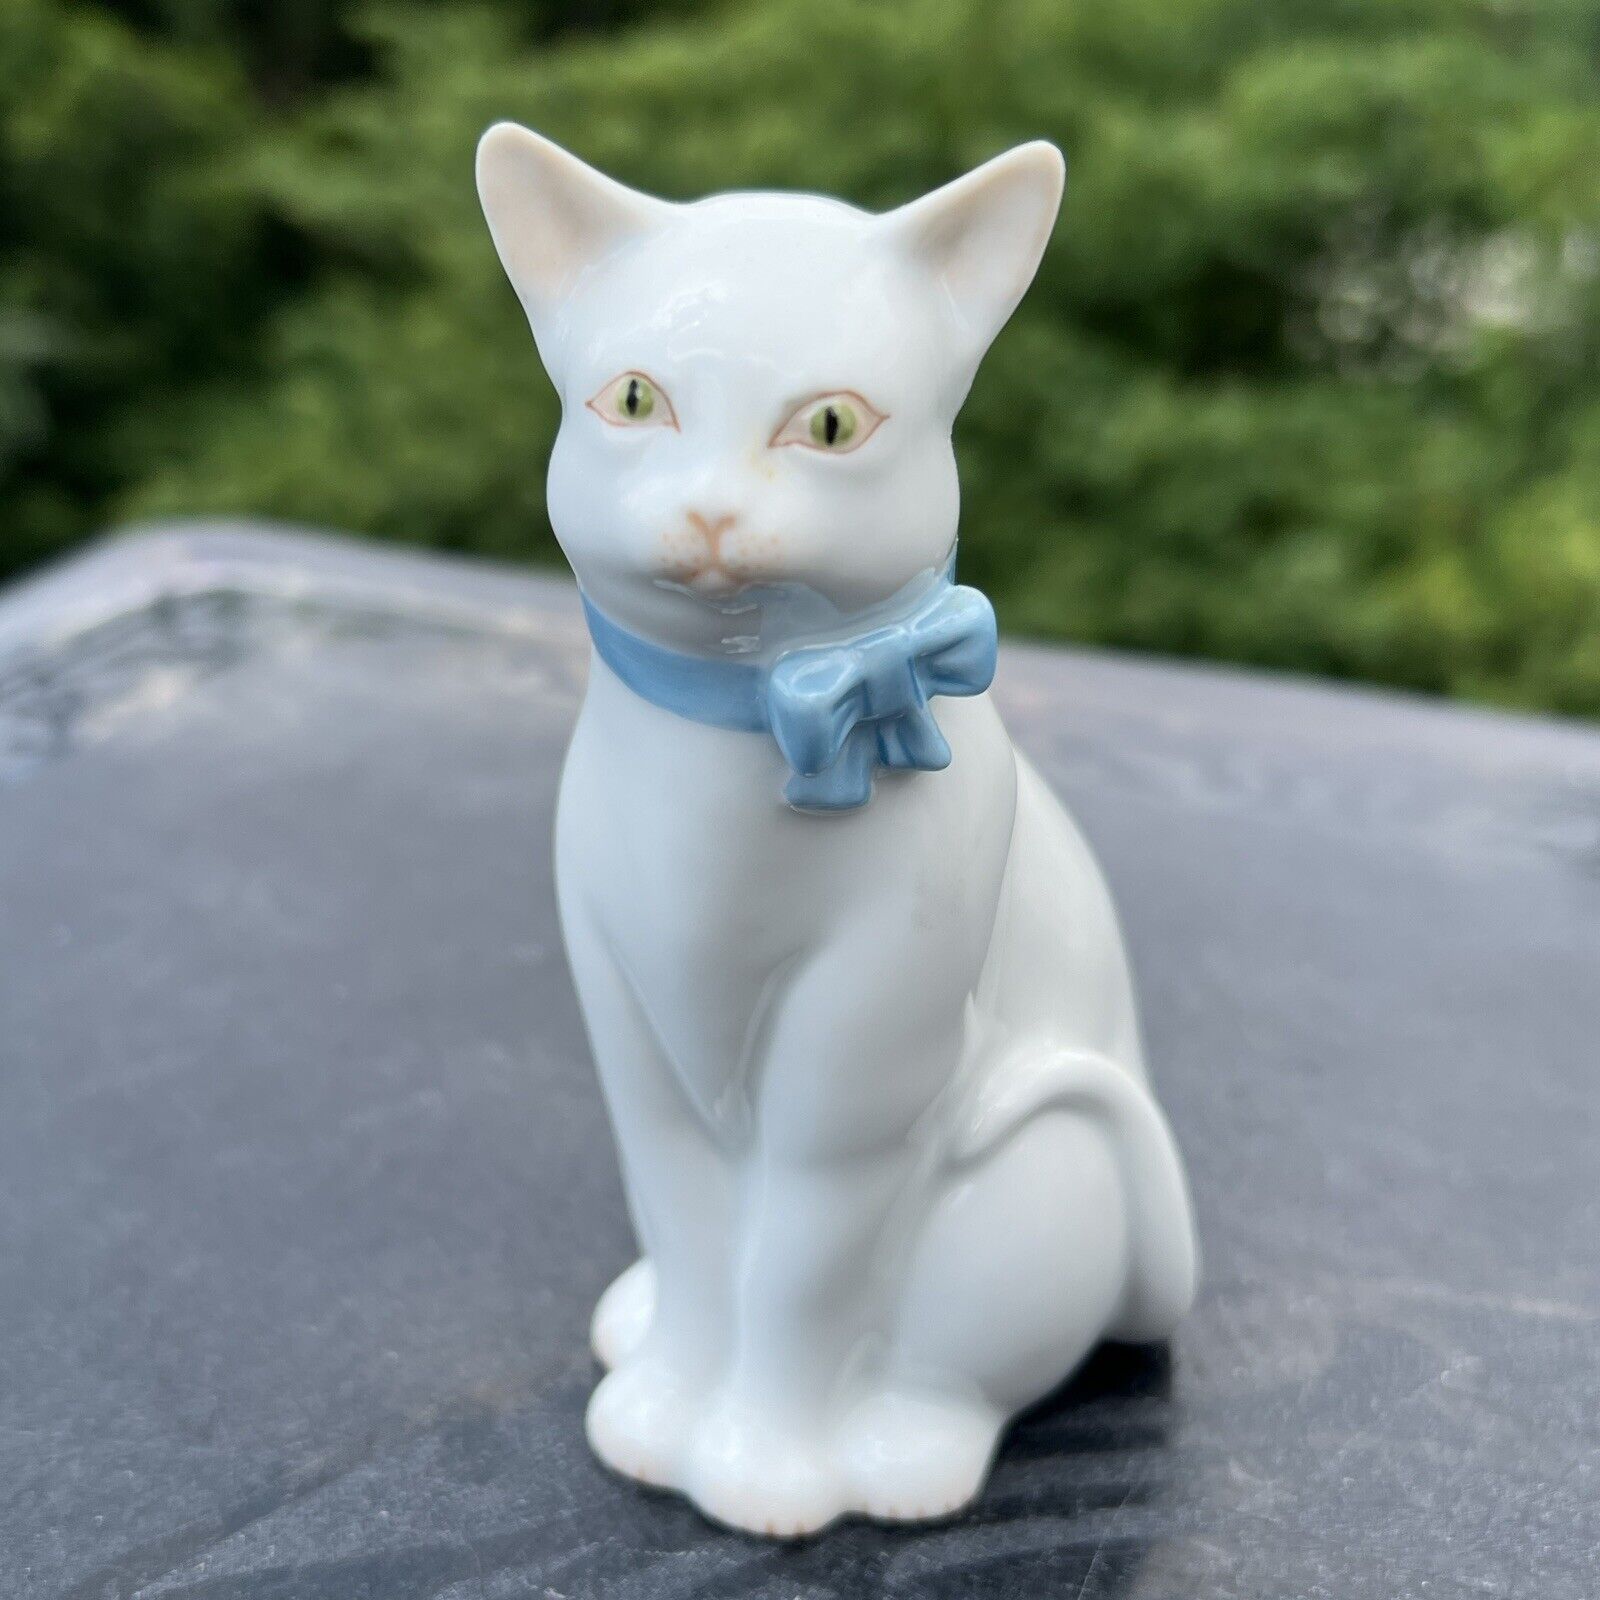 Vtg HEREND Fine Porcelain White Cat with Blue Ribbon Collar Figurine Hungary